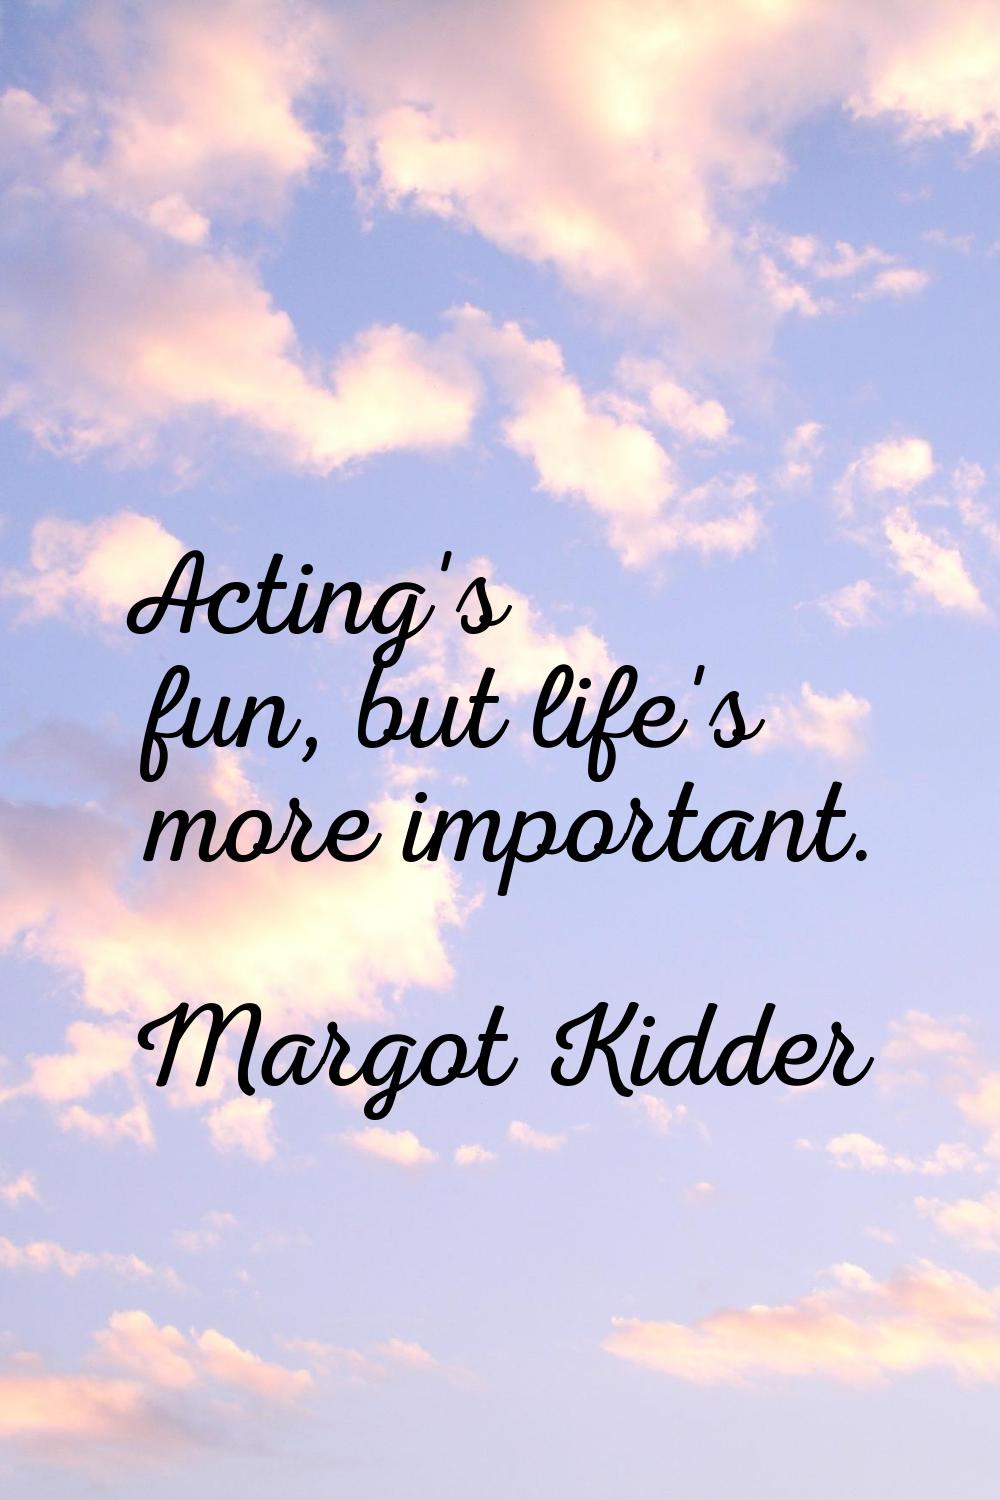 Acting's fun, but life's more important.